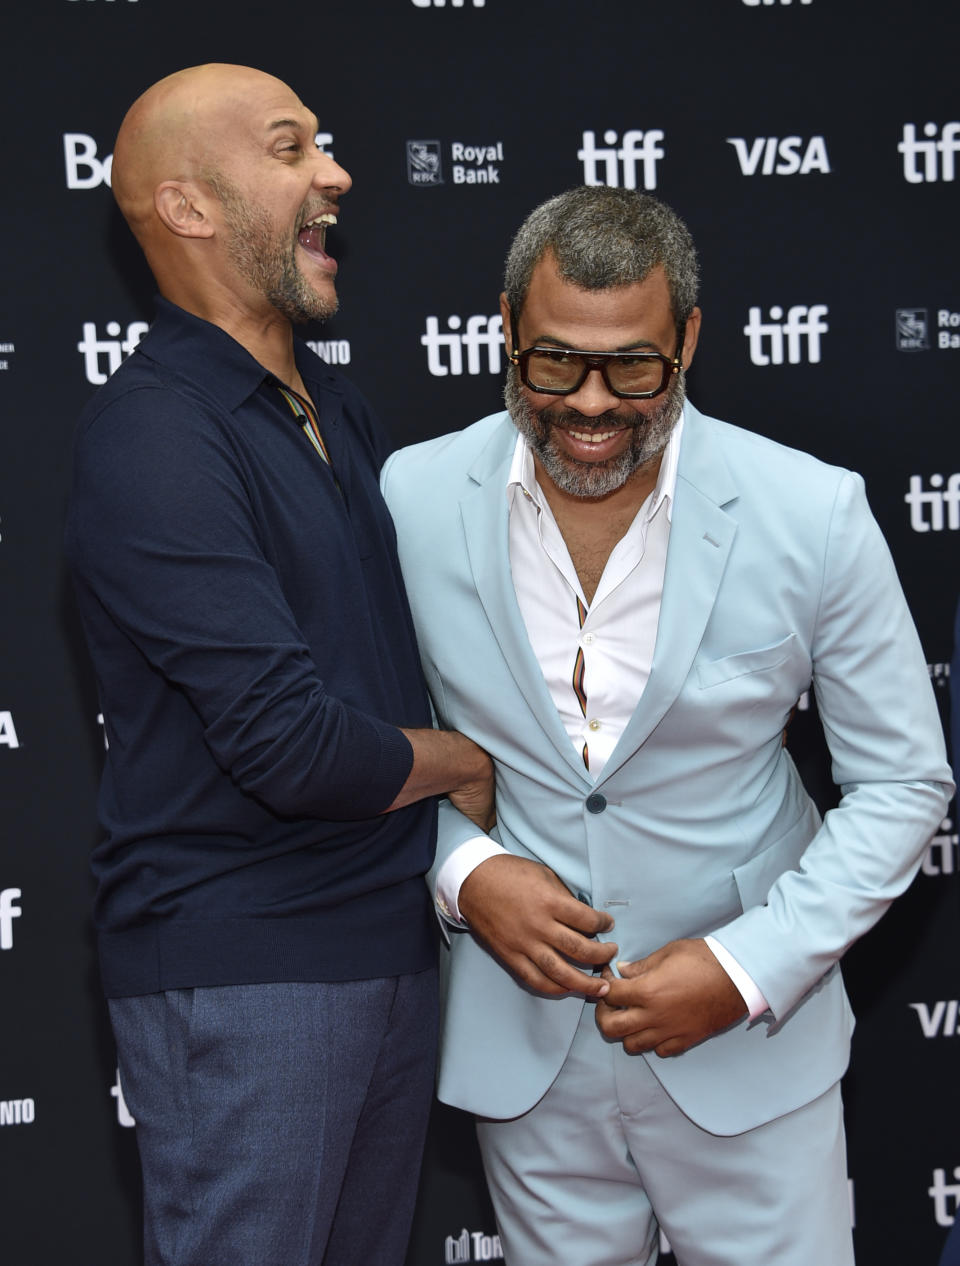 Keegan-Michael Key, left, and Jordan Peele attend the premiere of "Wendell & Wild" at the Princess of Wales Theatre during the Toronto International Film Festival, Sunday, Sept. 11, 2022, in Toronto. (Photo by Evan Agostini/Invision/AP)